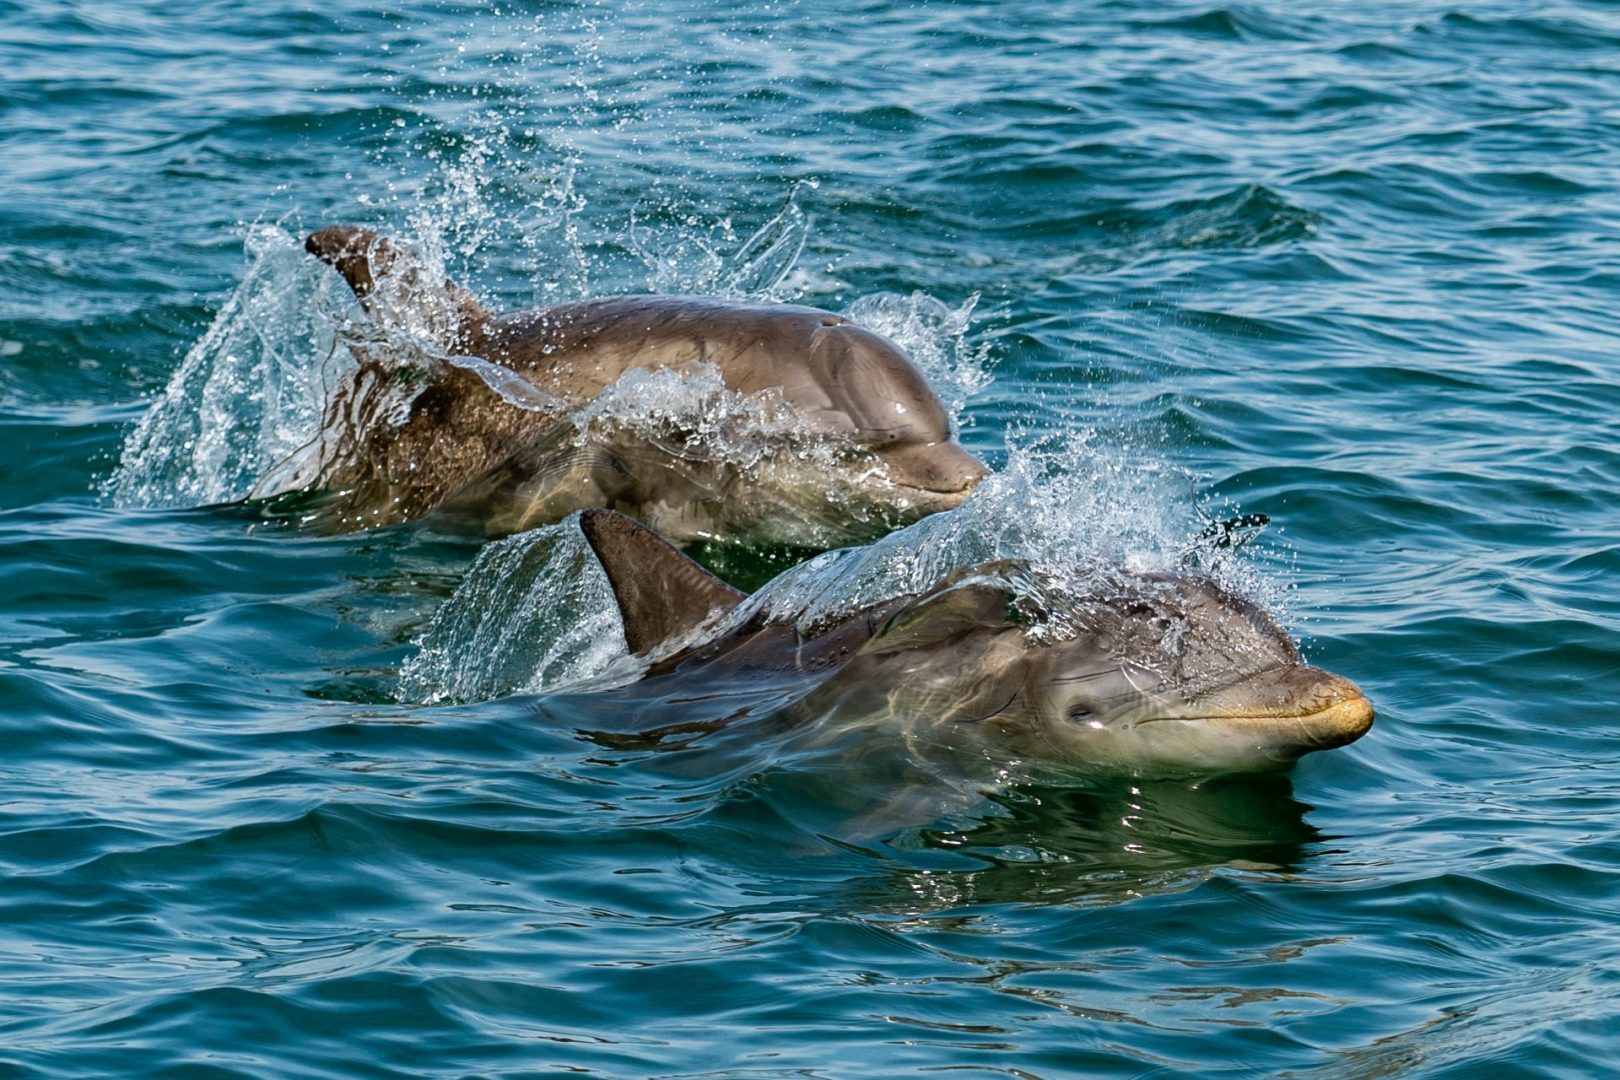 On a boat tour in the Chesapeake Bay you may well see dolphins swimming along.